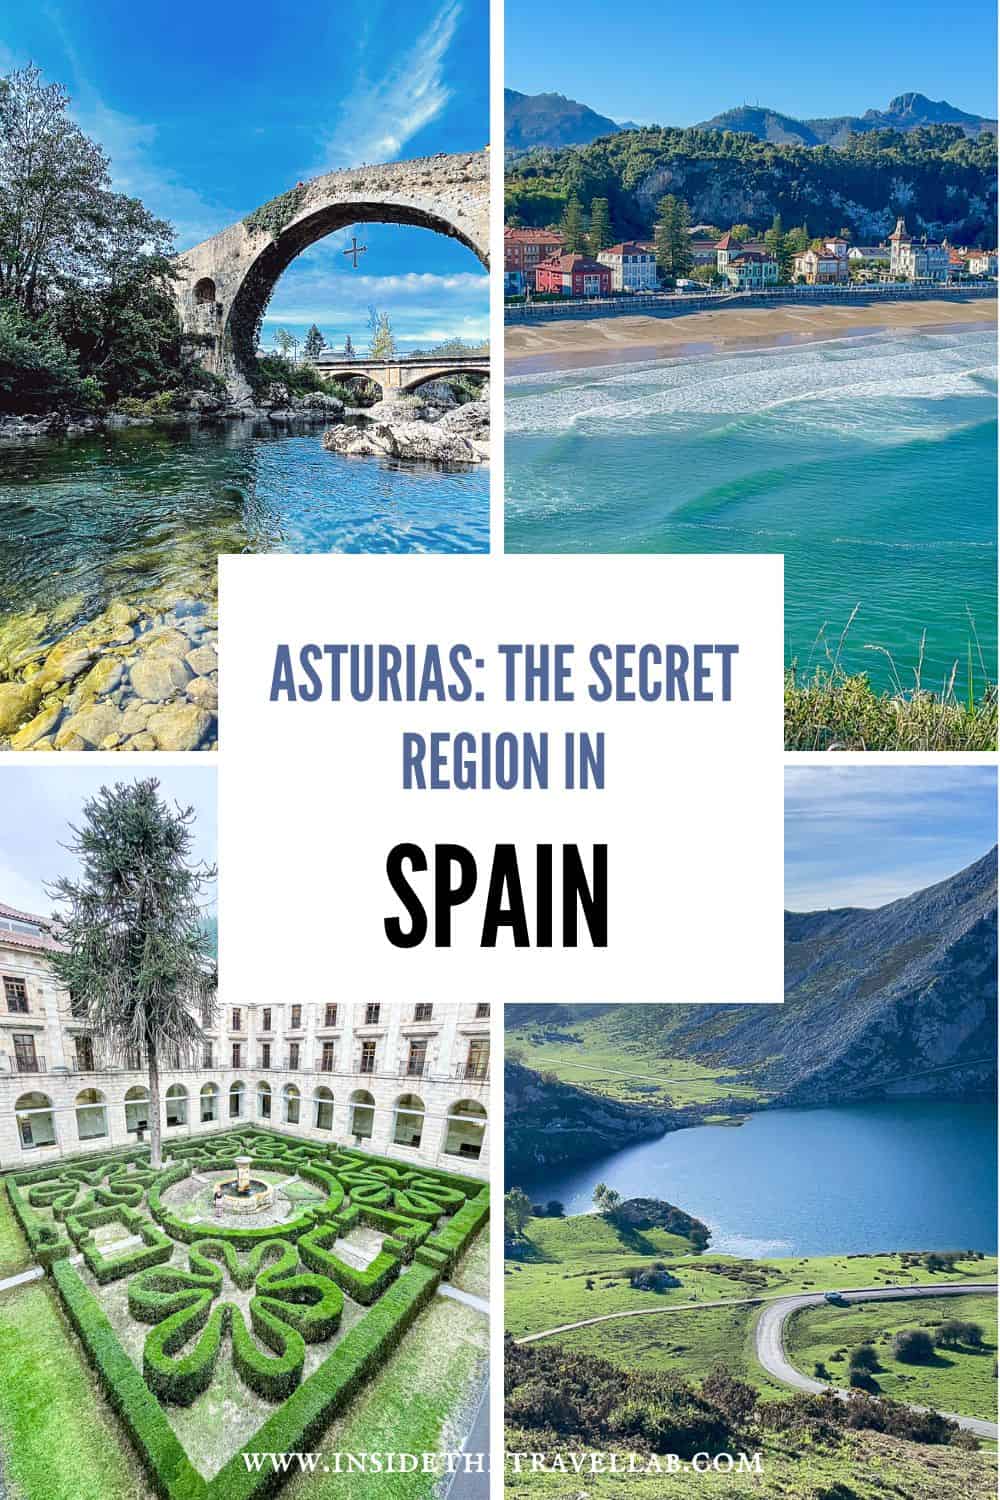 Spain - Asturias highlights cover image for Pinterest